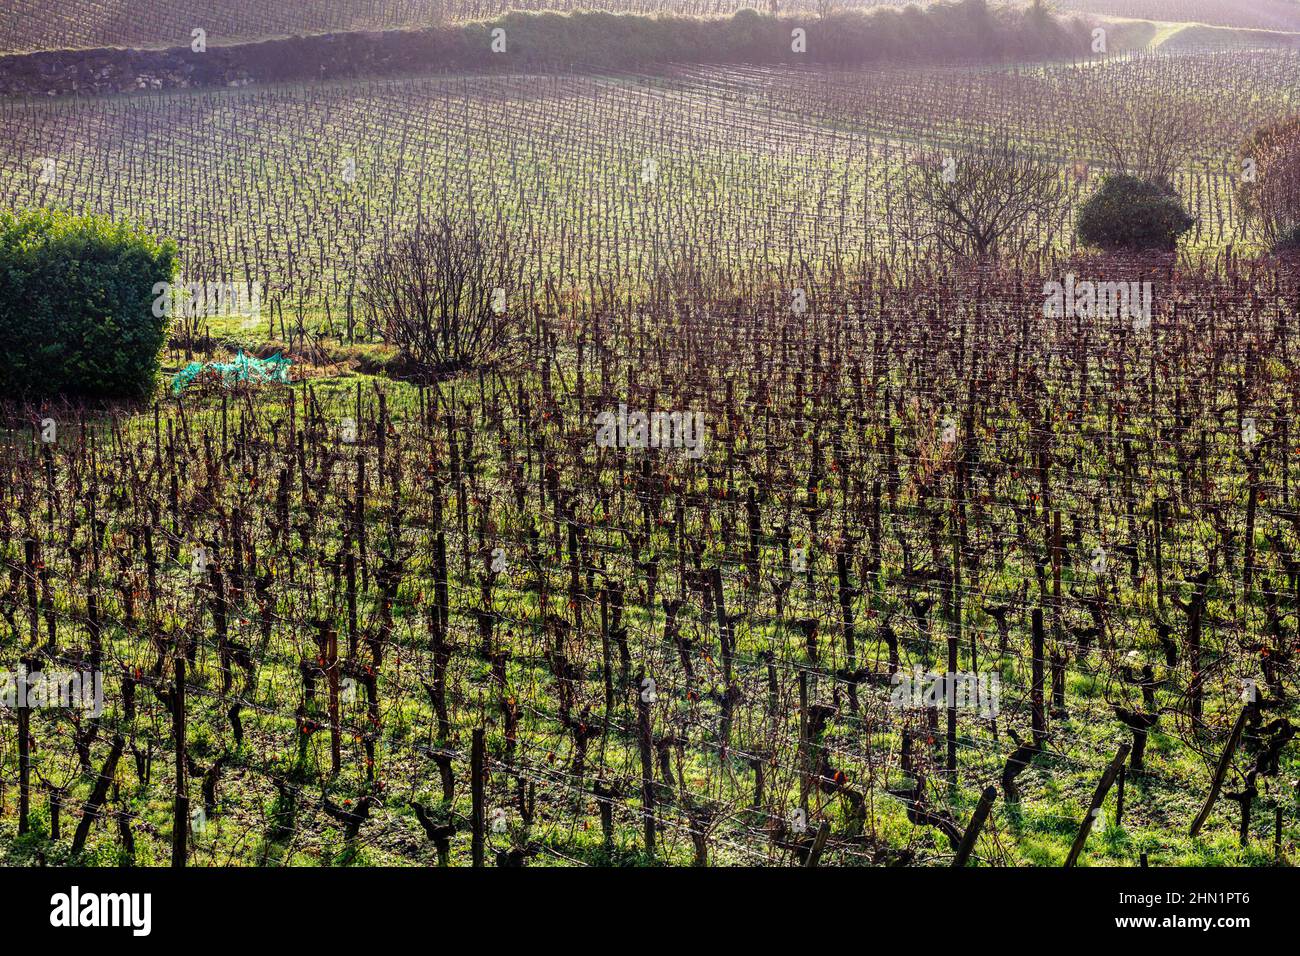 Vineyards in the town of Saint Emilion in southwestern France. A region producing wine in the area of Bordeaux. Stock Photo